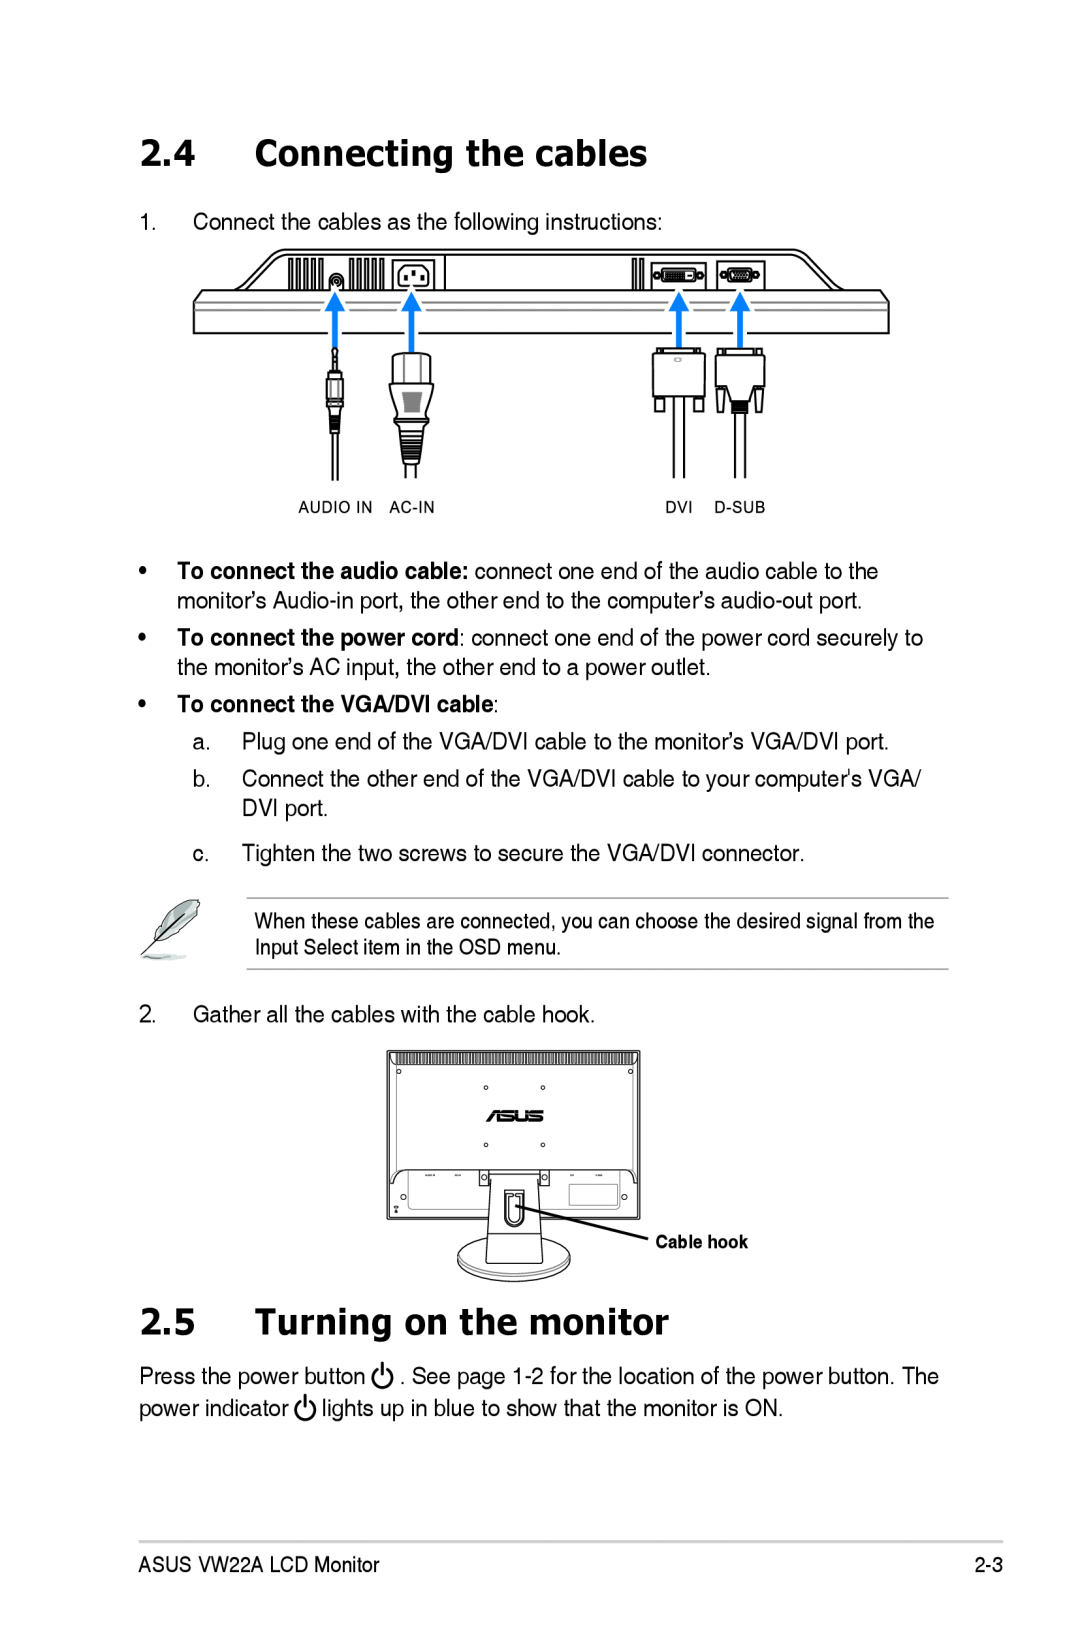 Asus VW22ATCSM manual Connecting the cables, Turning on the monitor, To connect the VGA/DVI cable 